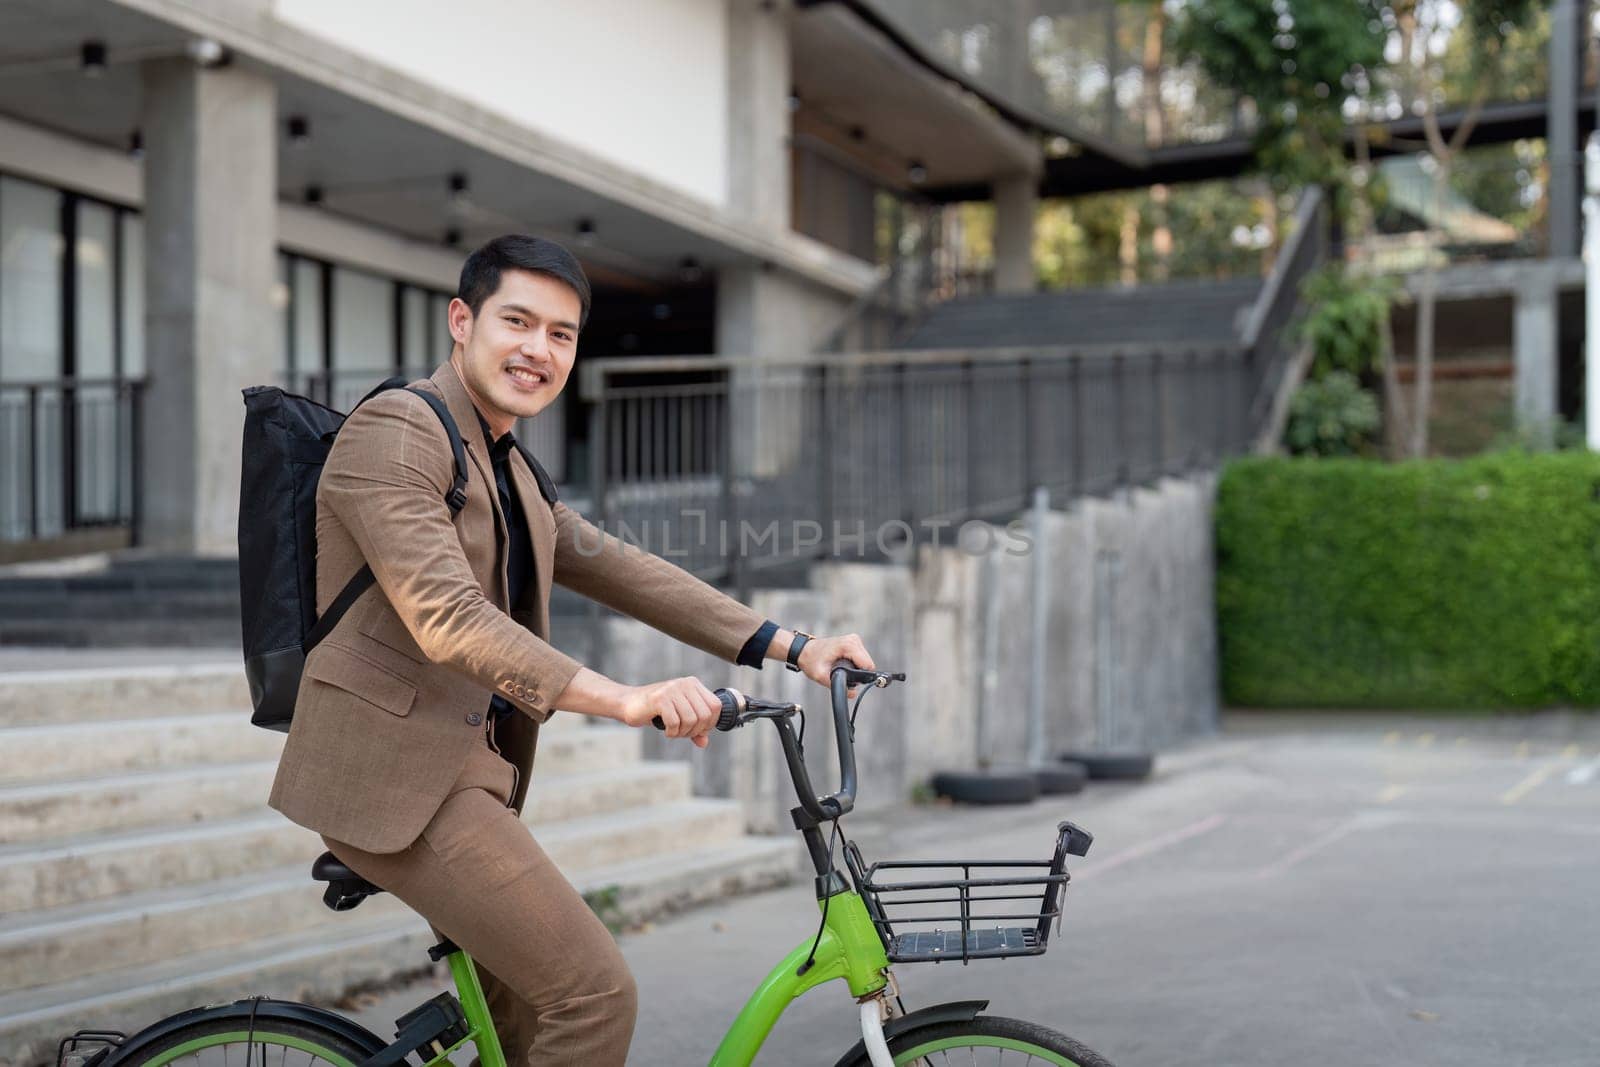 The businessman eco friendly transportation, cycling through the city avenues to go to work. sustainable lifestyle concept by nateemee